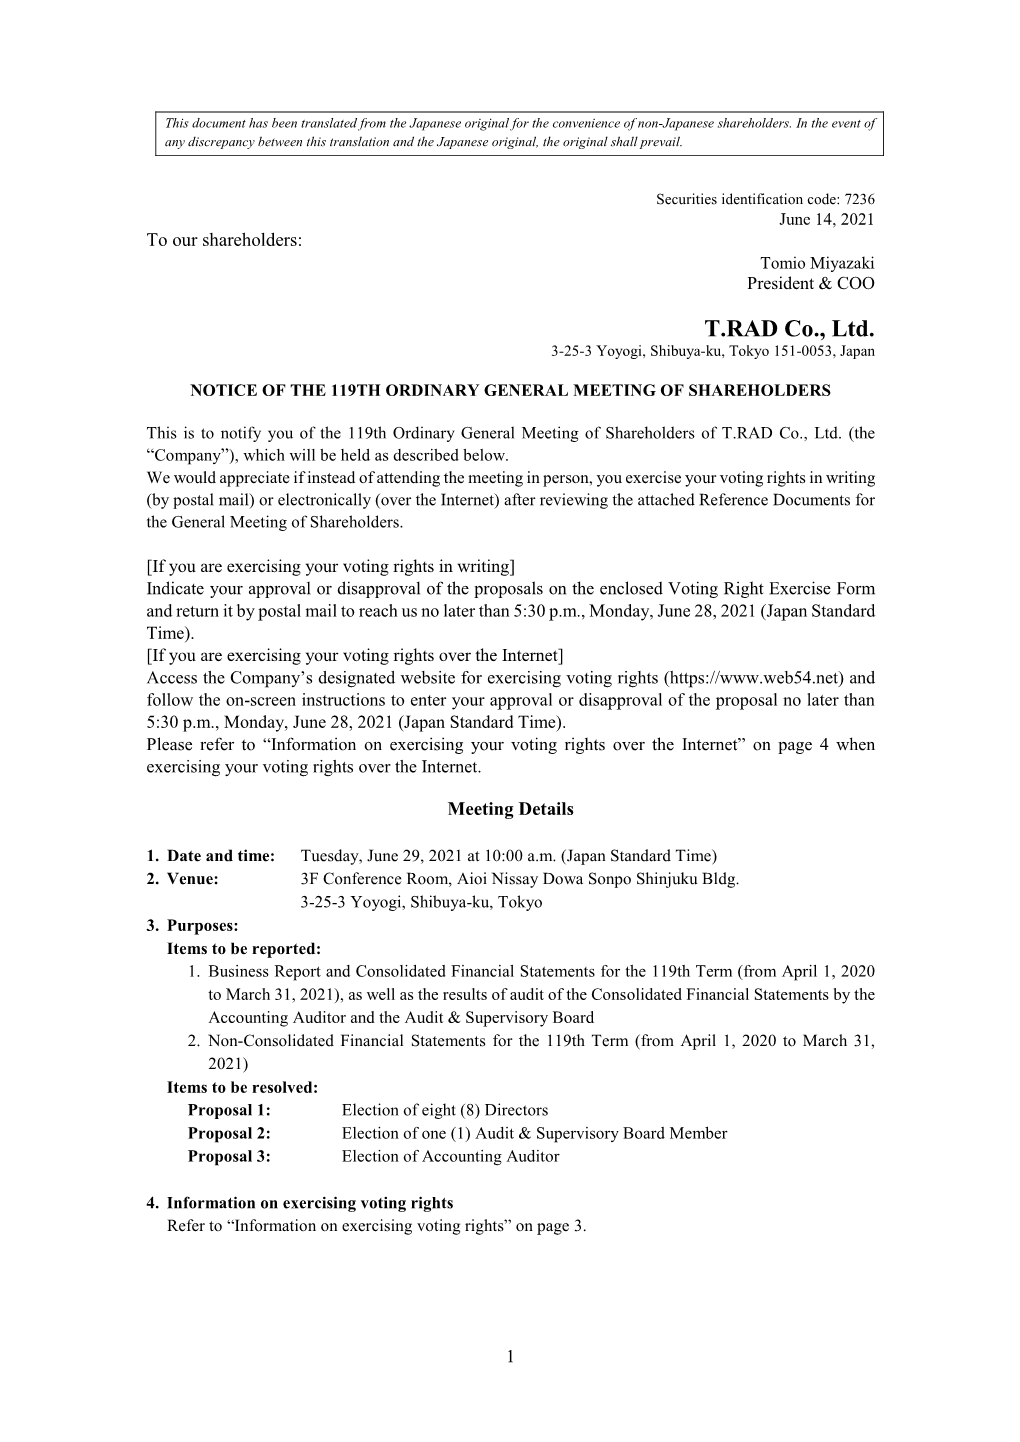 Notice of the 119Th Ordinary General Meeting of Shareholders(June 14, 2021)